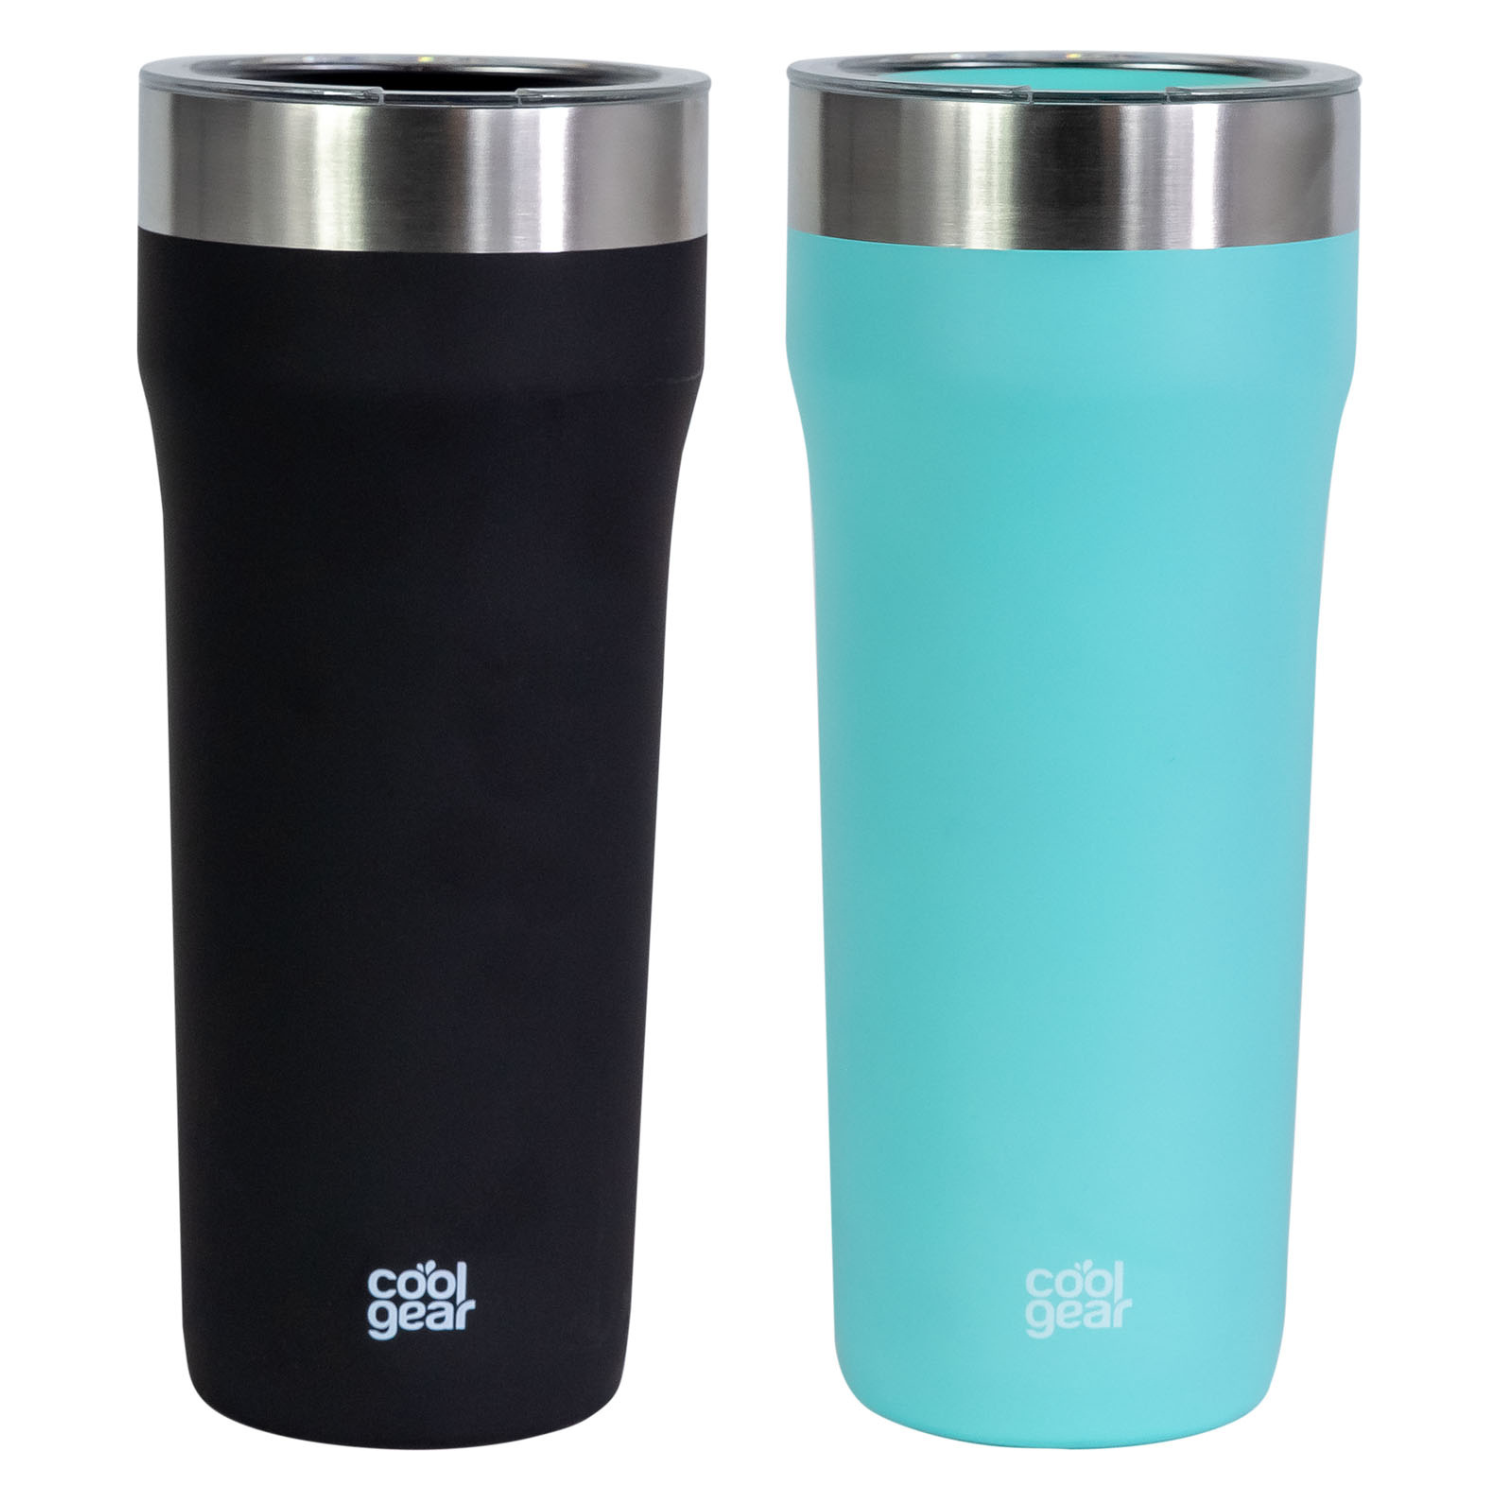 COOL GEAR 2-Pack 30 Ounce Eclipse Stainless Steel Tumbler | Slide & Sip Lid - image 1 of 1